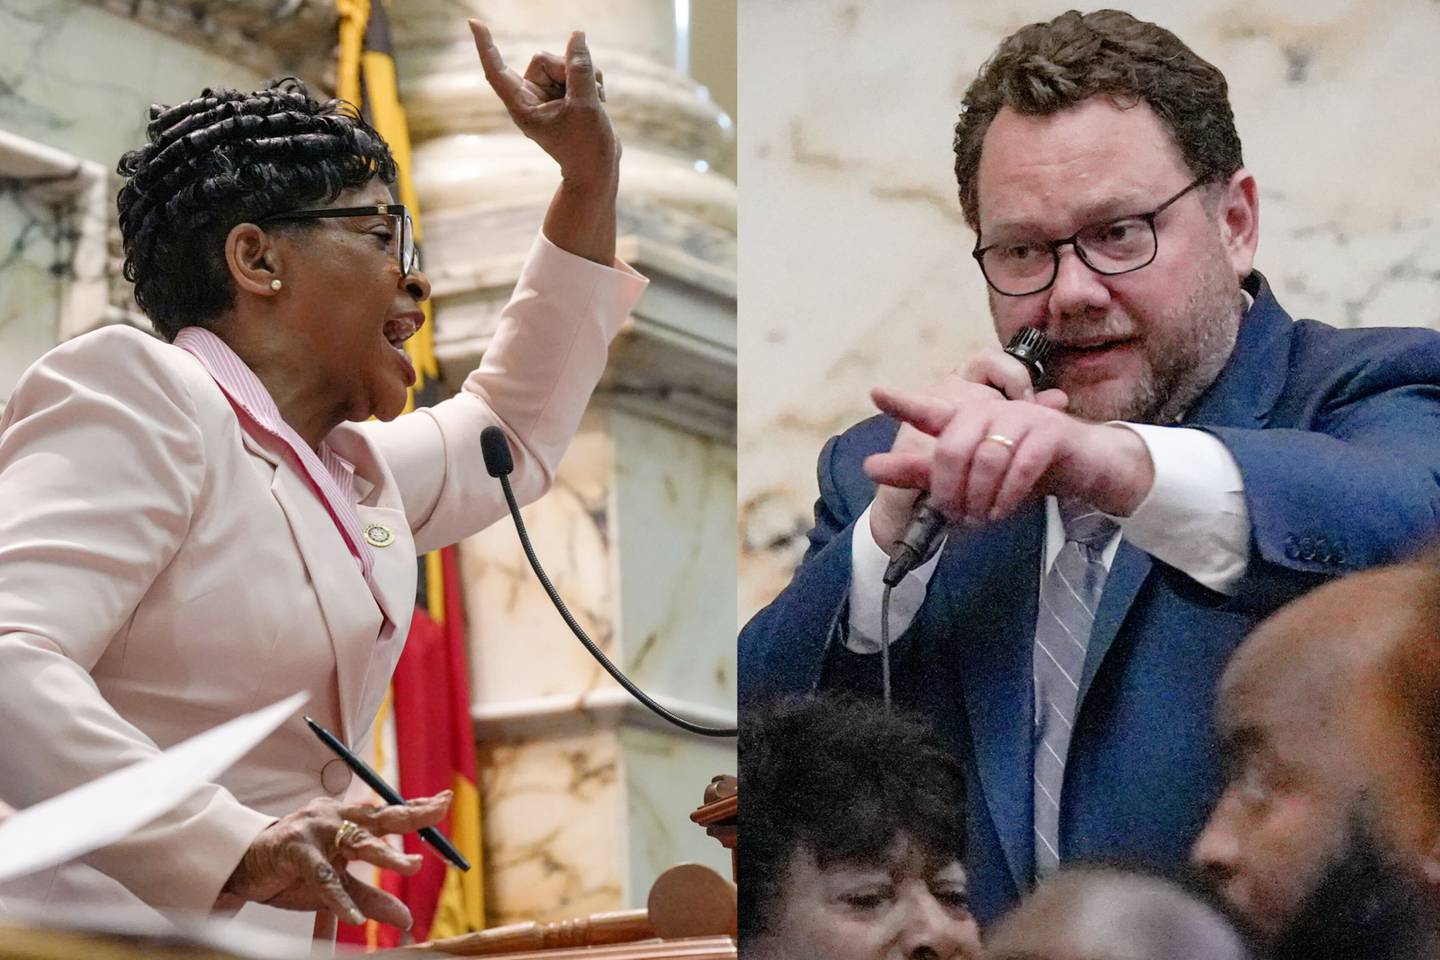 House Speaker Adrienne A. Jones, left, and Del. Nic Kipke, right. Kipke questioned Jones' ruling to end voting without letting Republican members explain their vote.